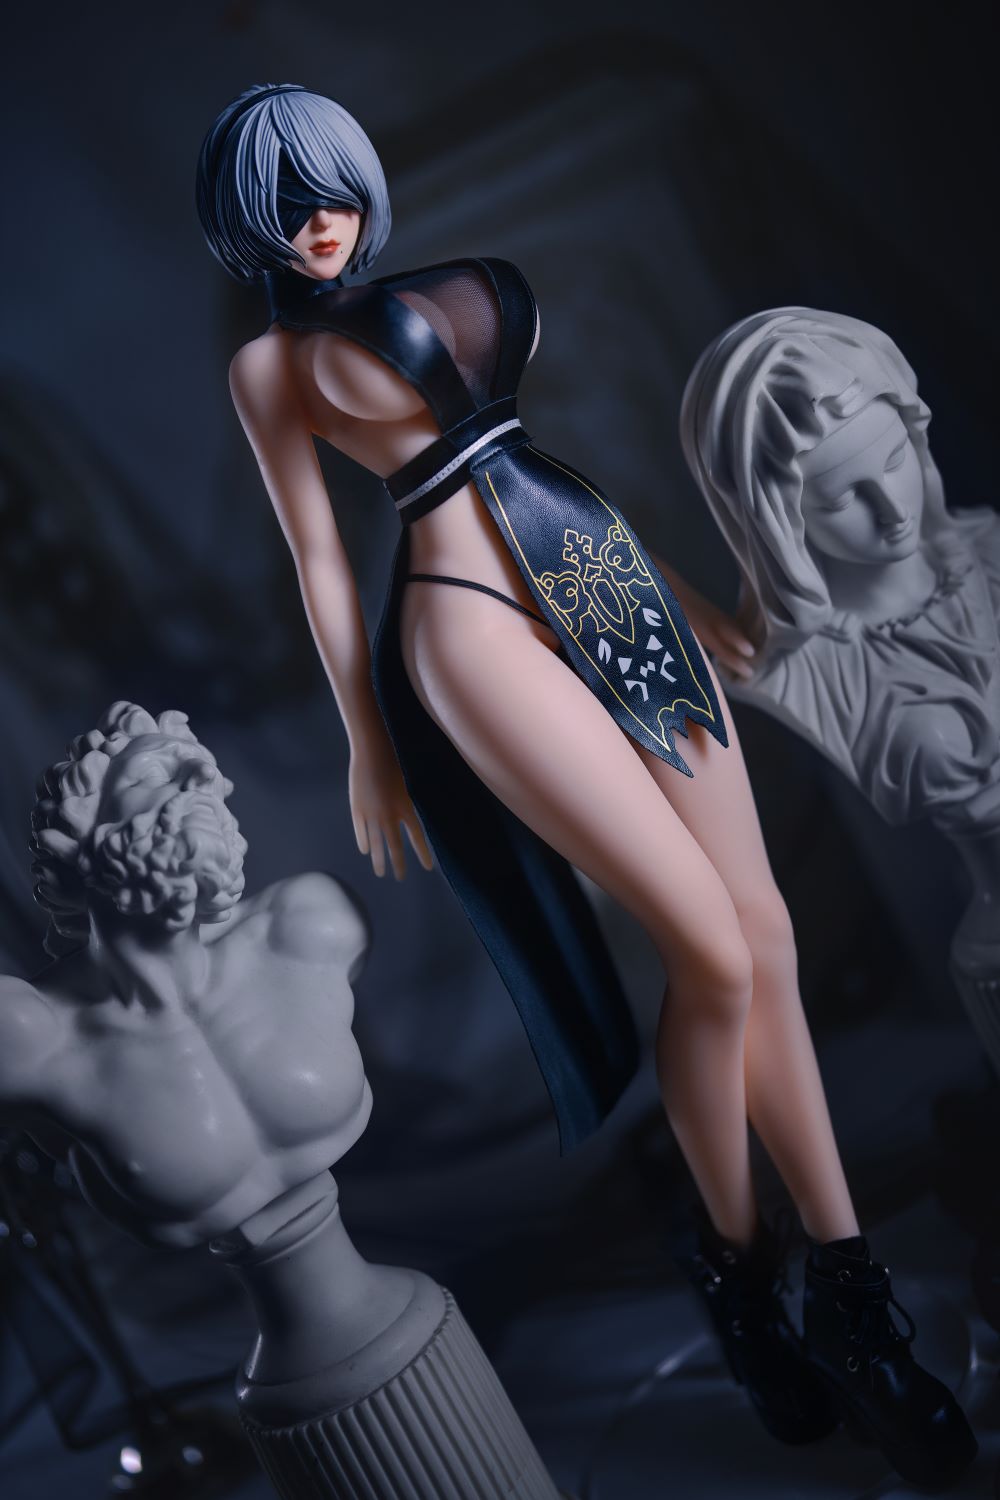 2b hentai sex doll of Nier Automata mini sex doll, in sexy costume standing between two status